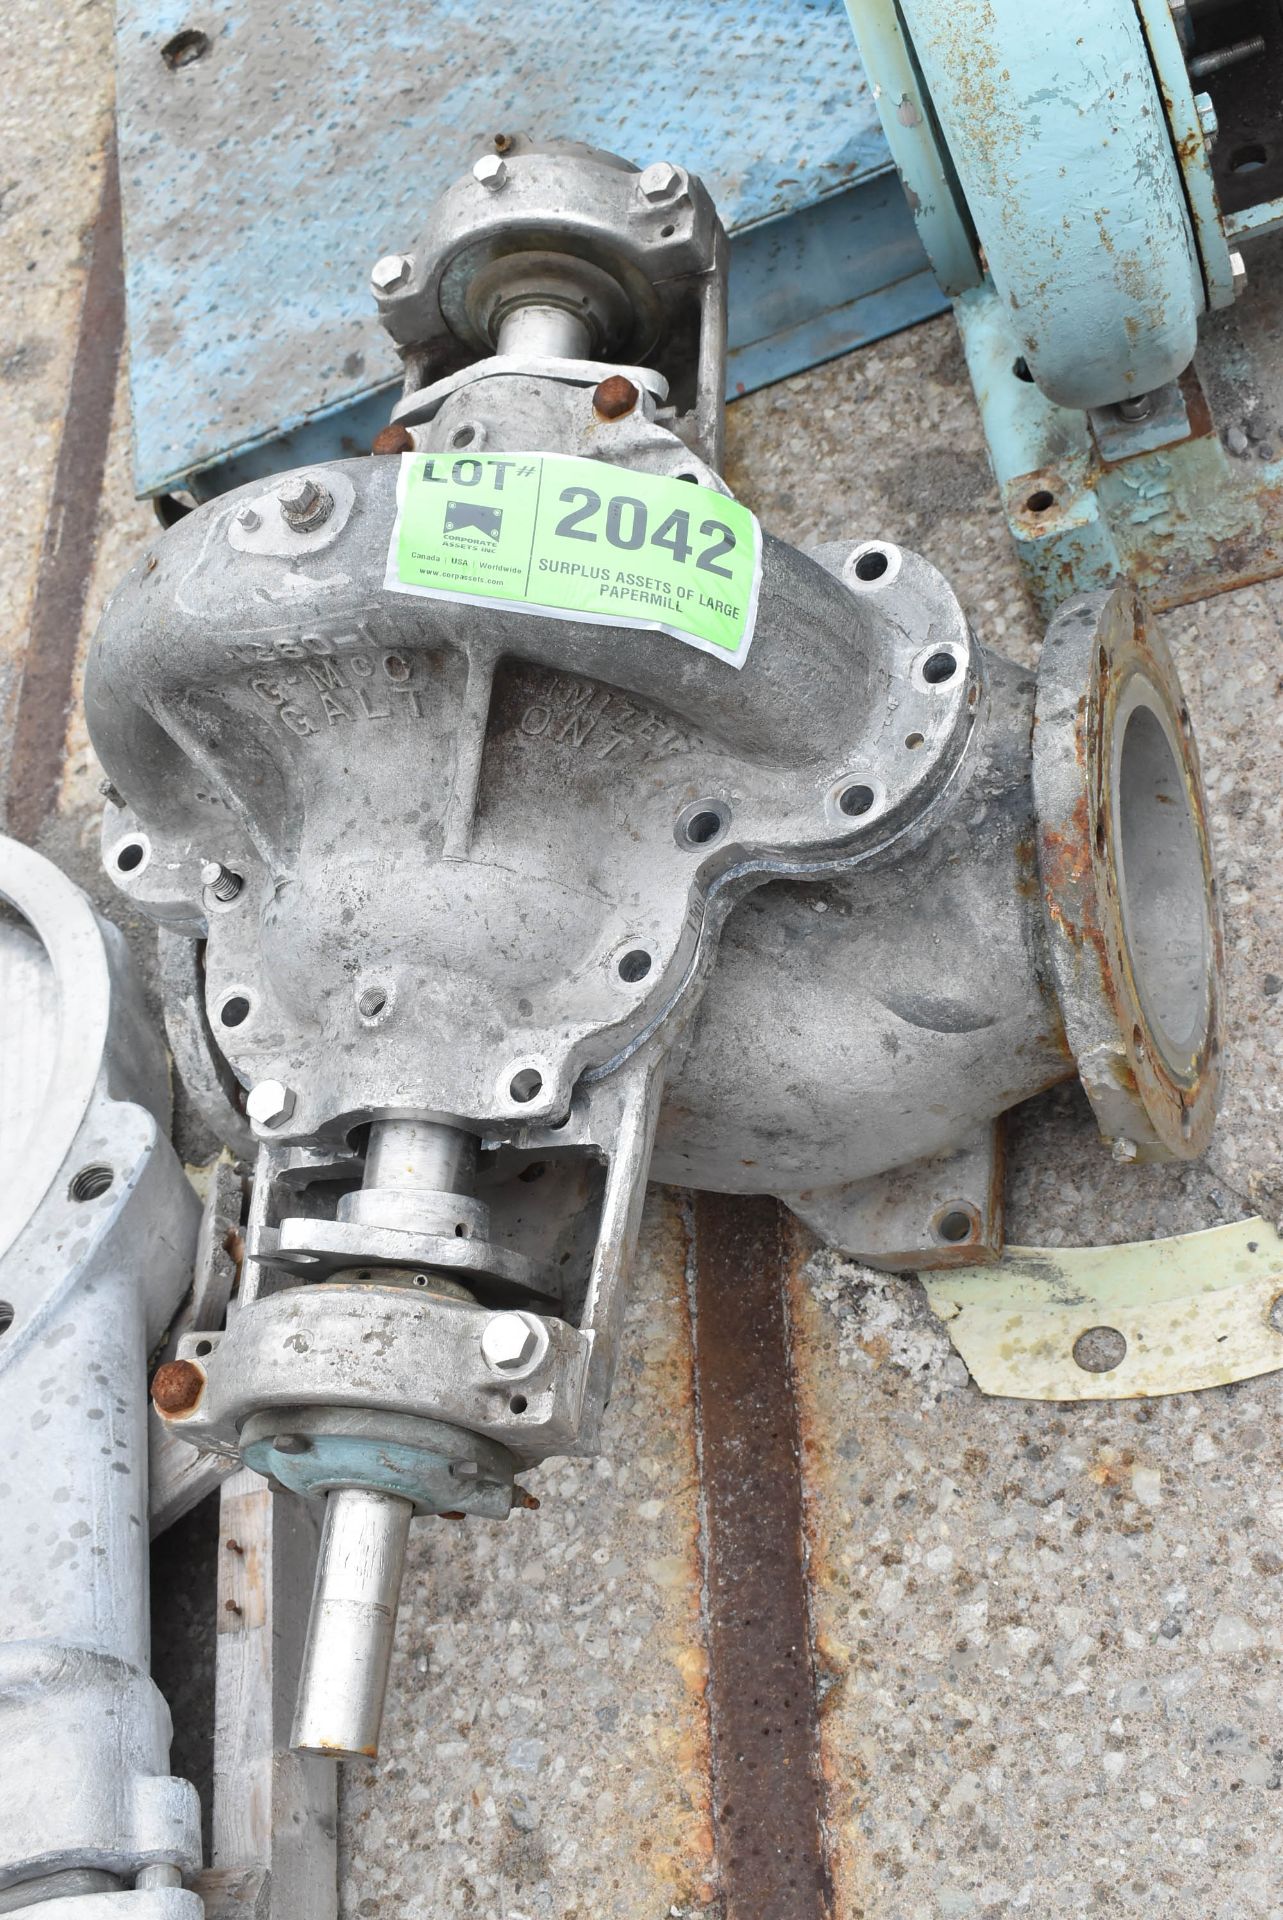 MFG. UNKNOWN 8" MECHANICALLY ACTUATED VALVE [RIGGING FEE FOR LOT #2042 - $25 USD PLUS APPLICABLE